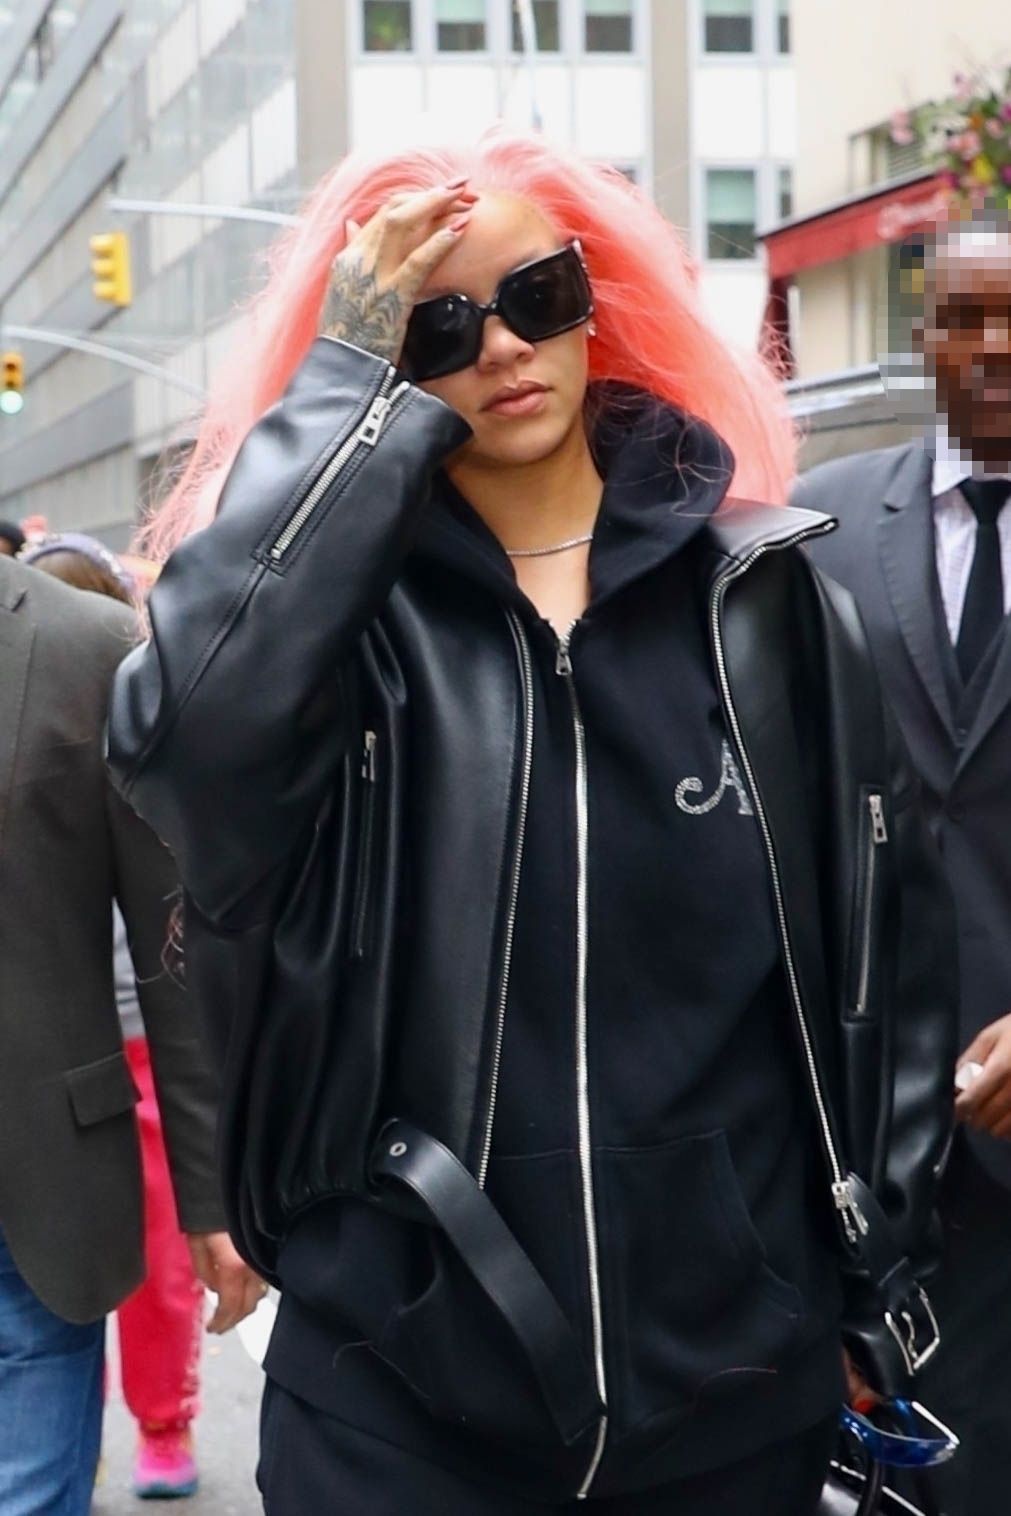 Rihanna dyed her hair pink.